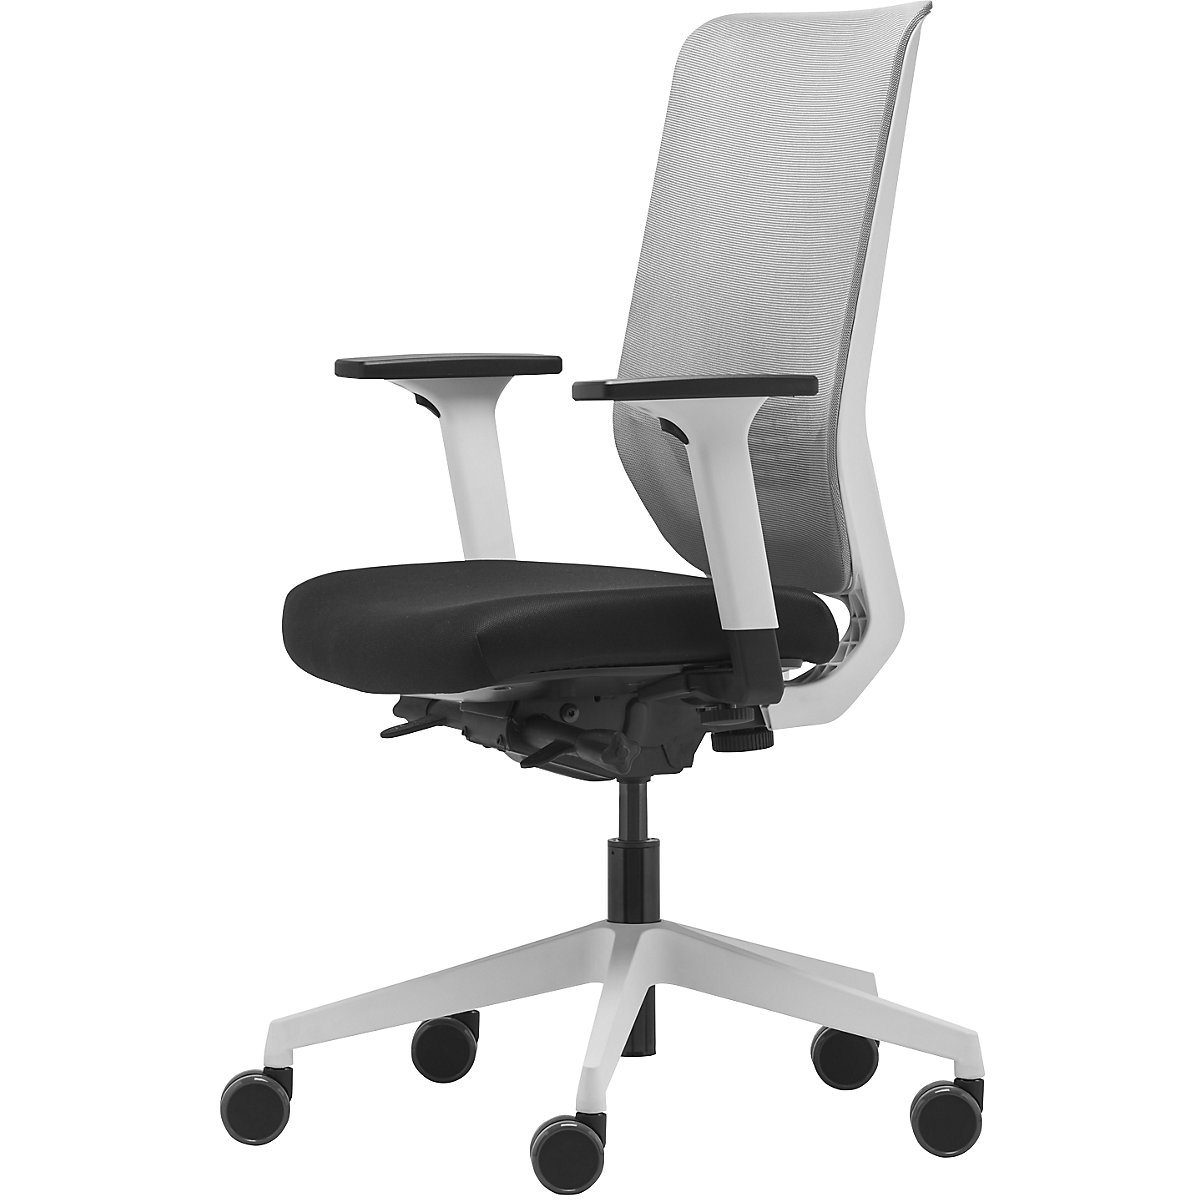 TO-SYNC PRO office swivel chair - TrendOffice